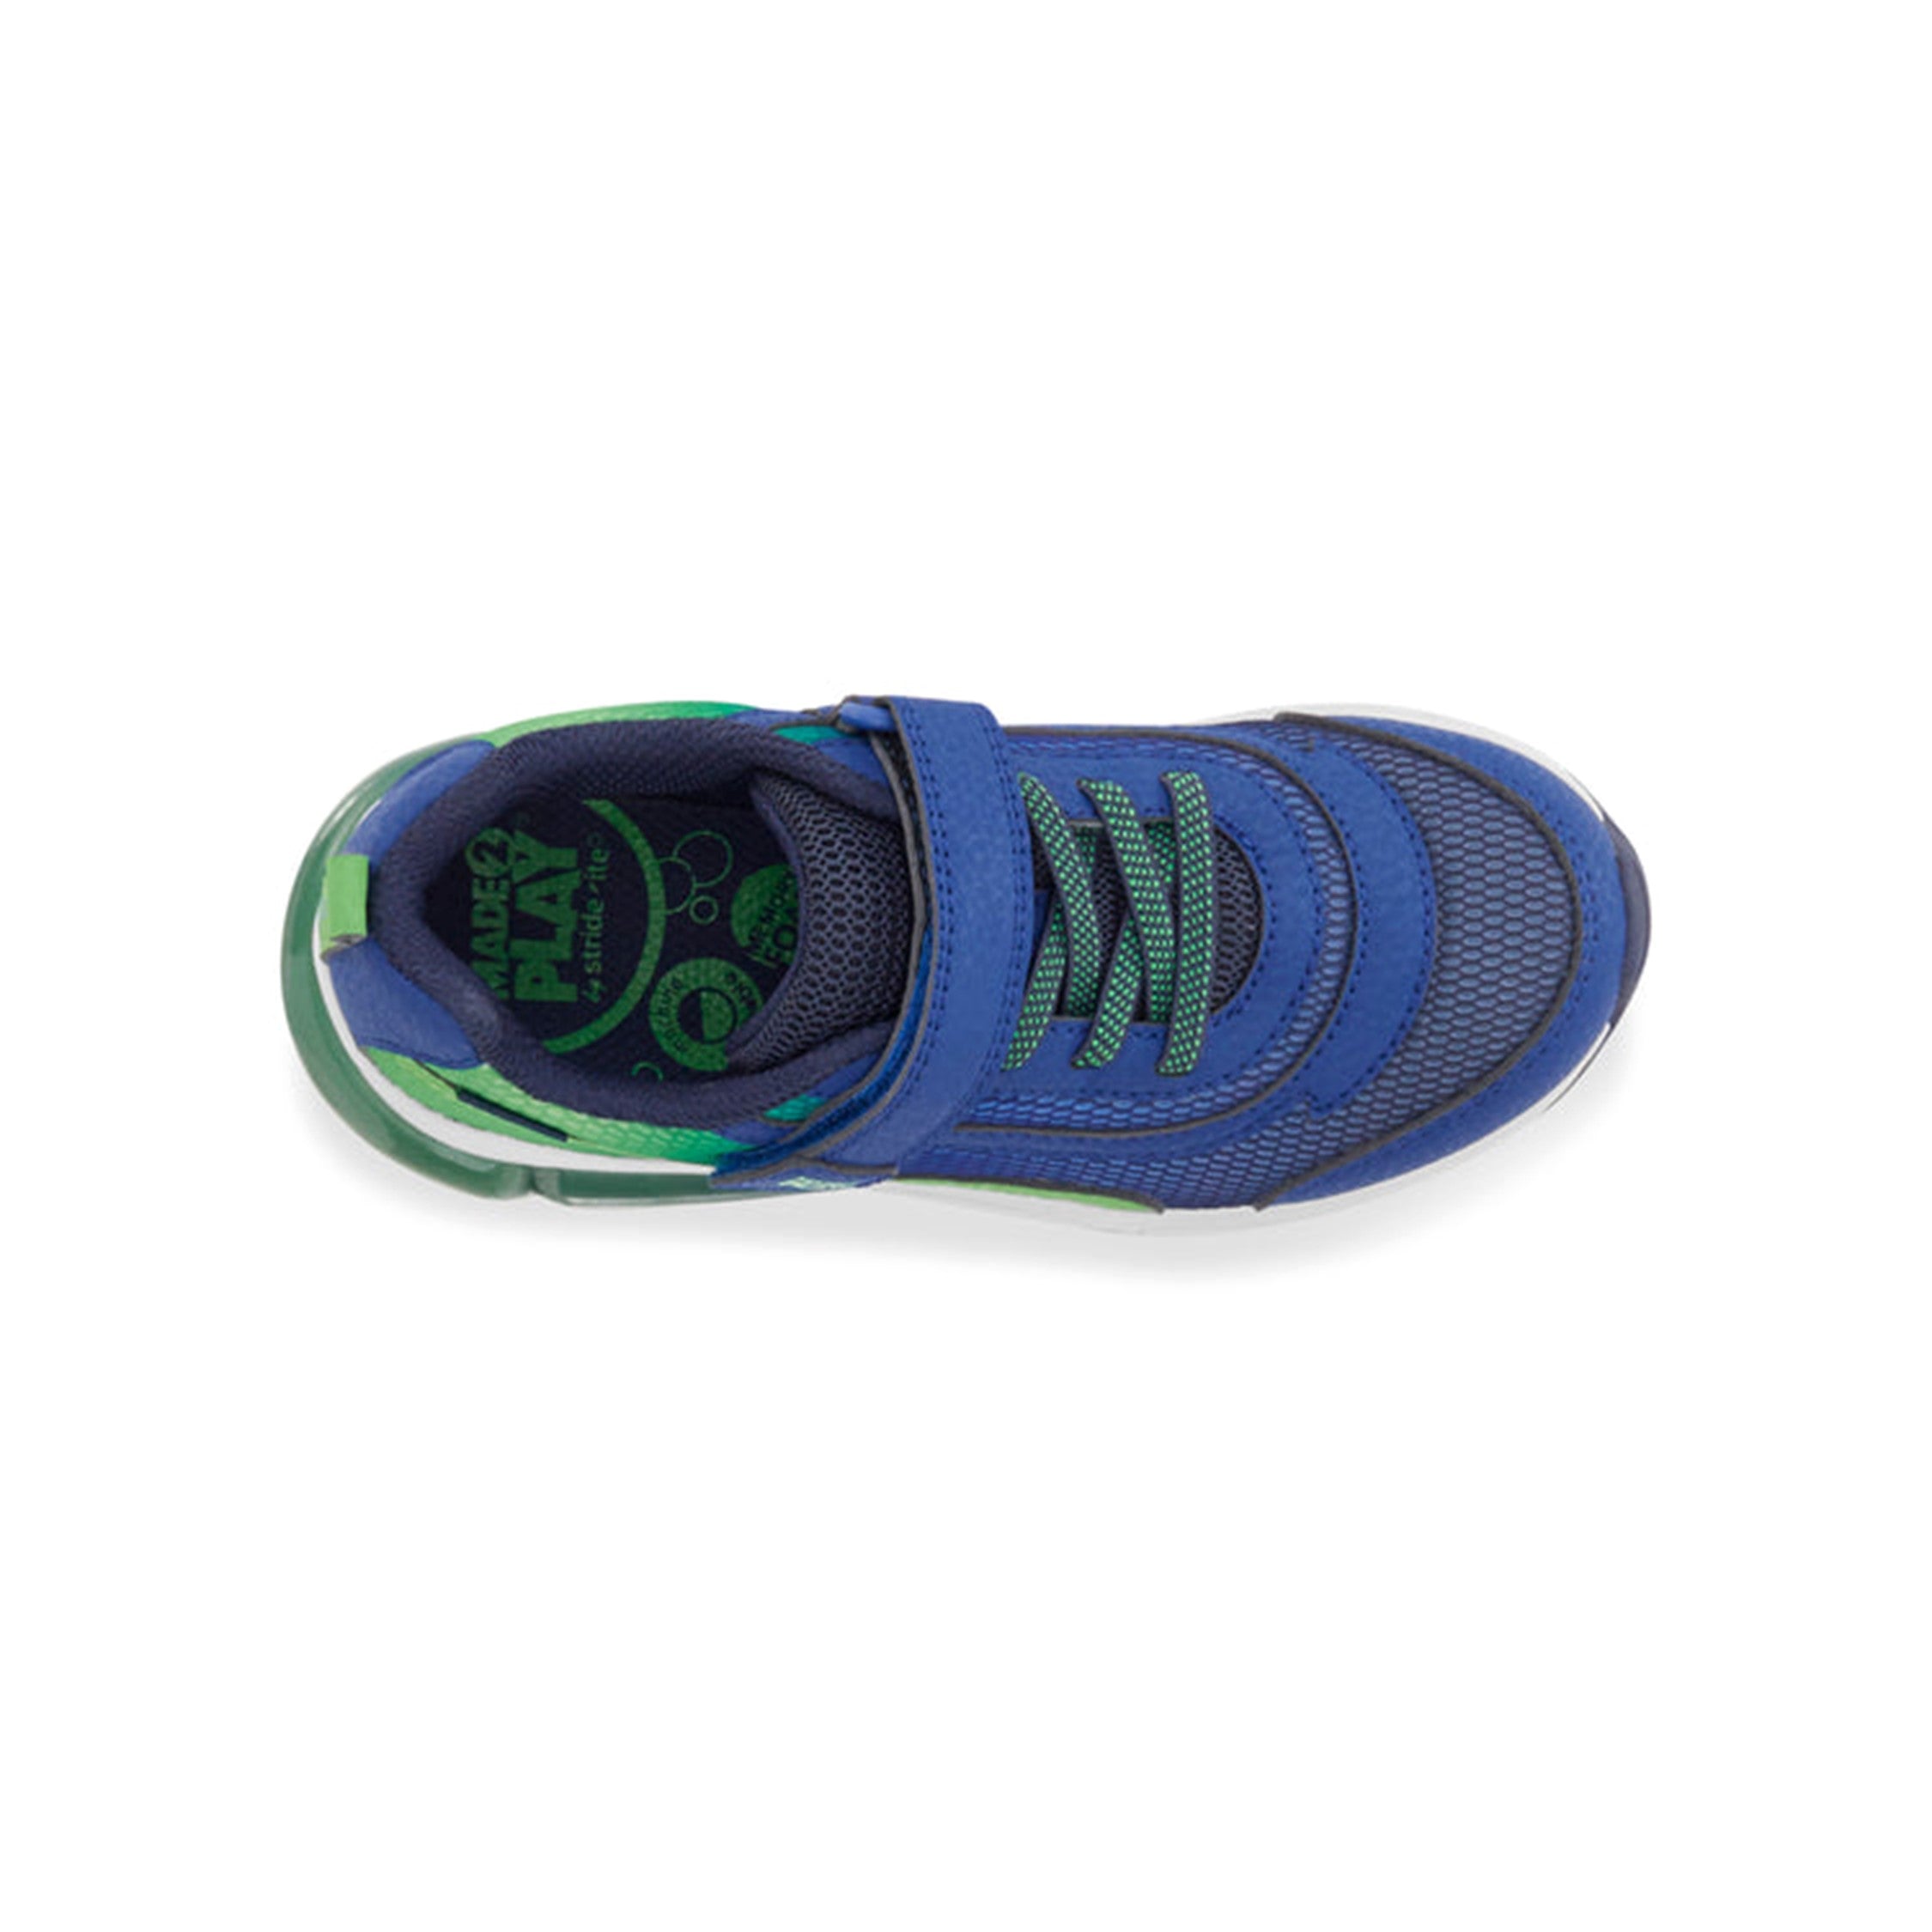 MADE2PLAY® Kid's Surge Bounce Lighted Athletic - Navy/Green